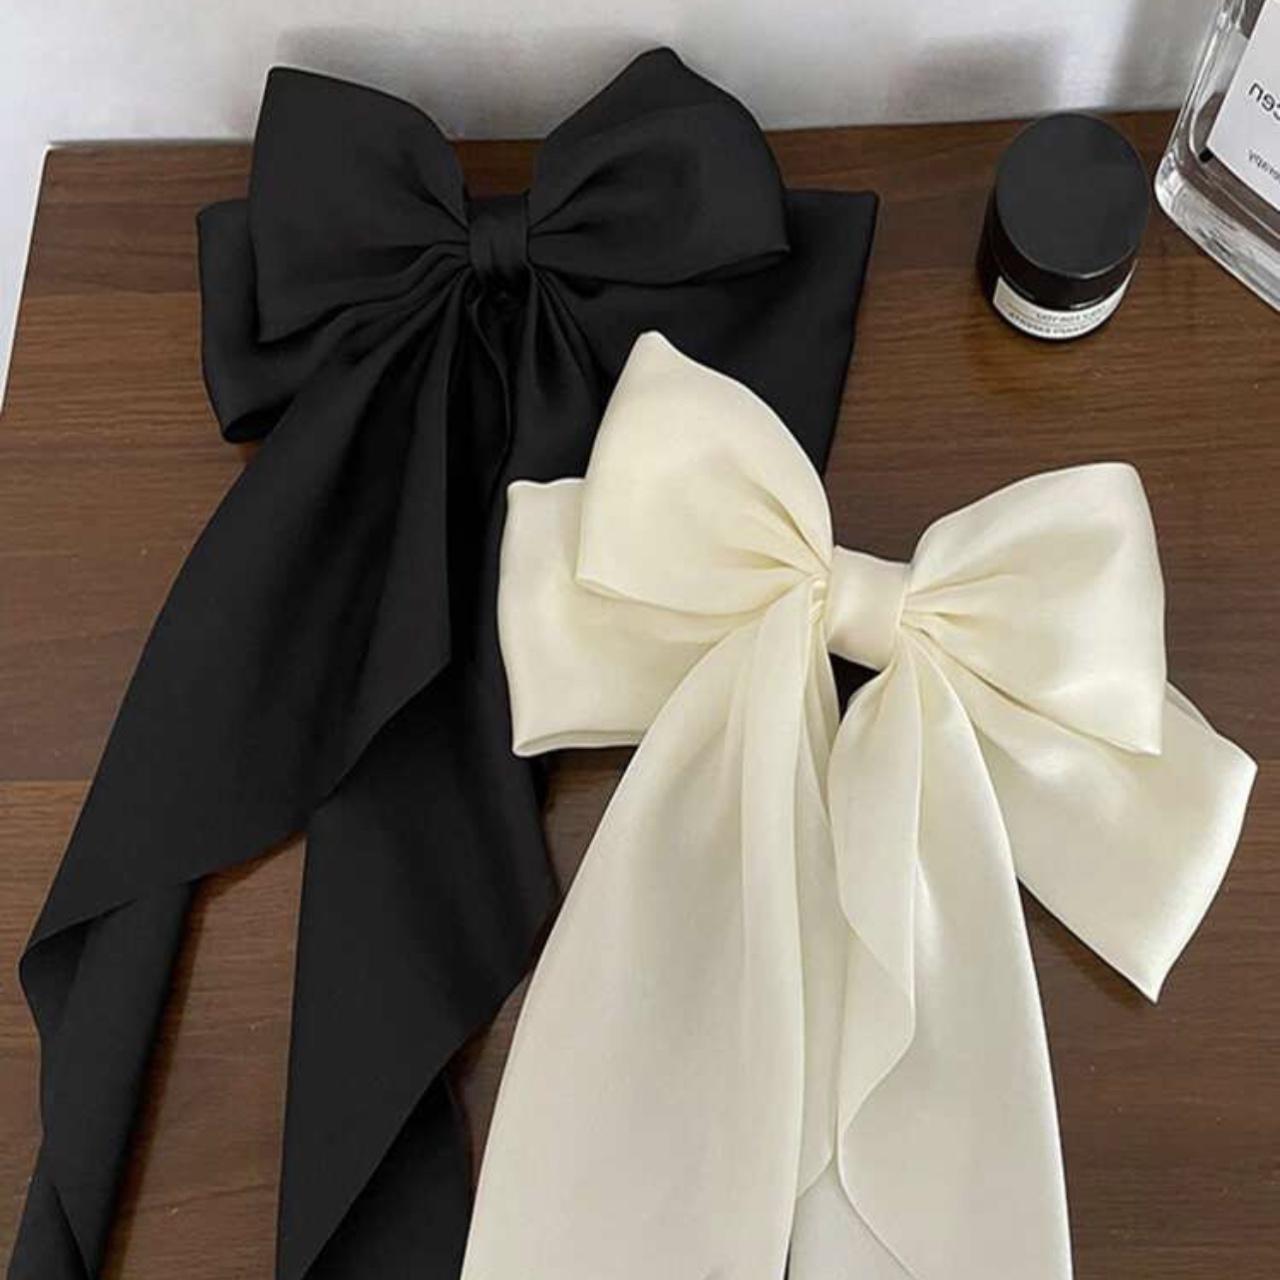 1pc black/white bow Brand new #bow #hairbow - Depop